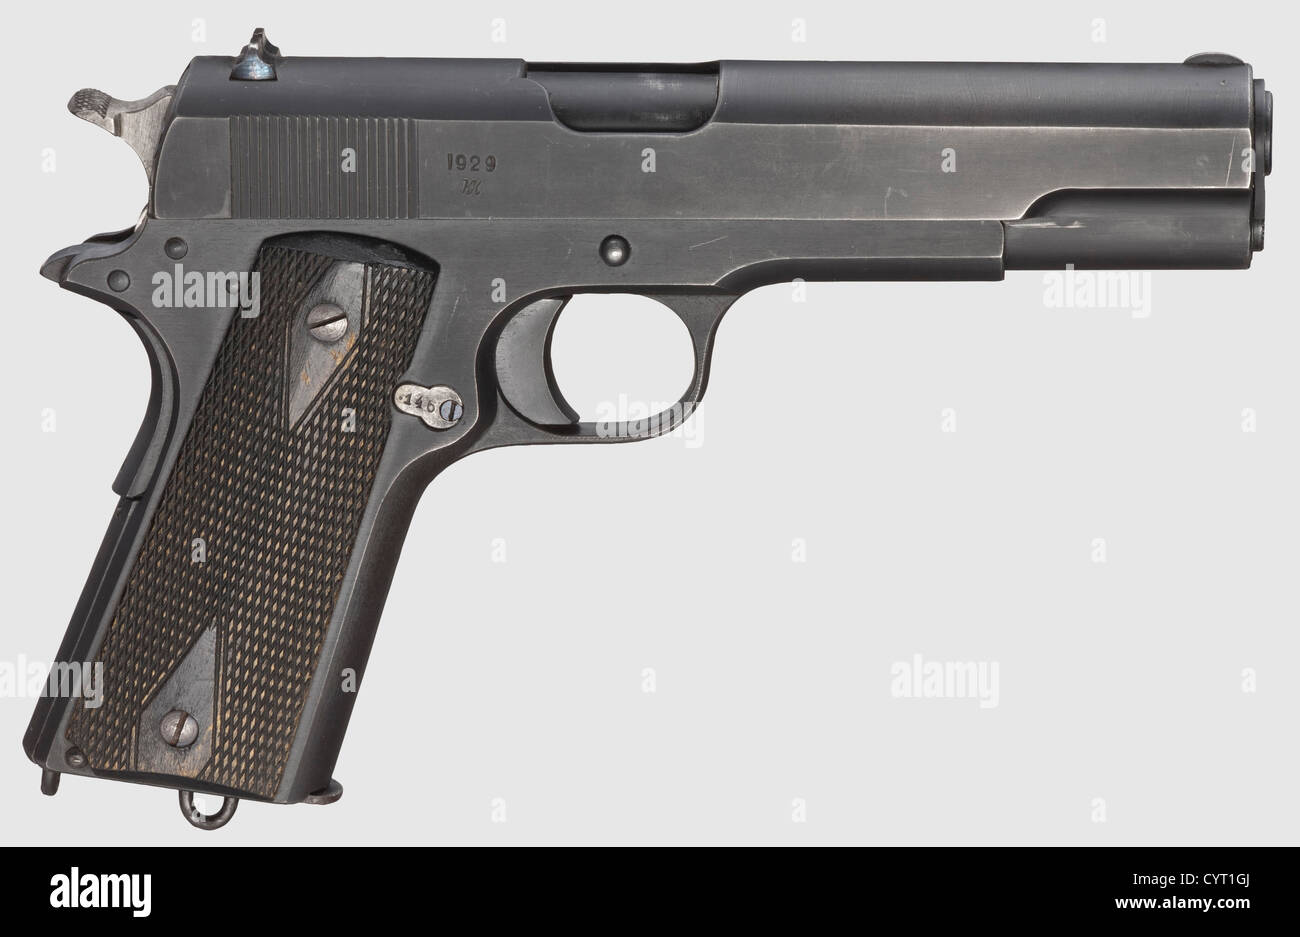 Automatic Pistol M/1914('Colt Kongsberg'),Cal.11.25 mm,no.21146.Completely matching numbers.Bright bore.Grip safety.On left side of slide marked '11,25 m/m AUT.PISTOL M/1914',on right side marked '1929' for the production year.Complete,original,black phosphatising.Blued front sight.Case-hardened hammer.Original,black factory-varnished softwood grip panels.Correct magazine with loop,no bluing on upper third.Collector's item in mint to new condition.Licensed replica of the Colt Pistol Mod.1911 by the Norwegian arms factory Kongsberg.Erwerb,Additional-Rights-Clearences-Not Available Stock Photo